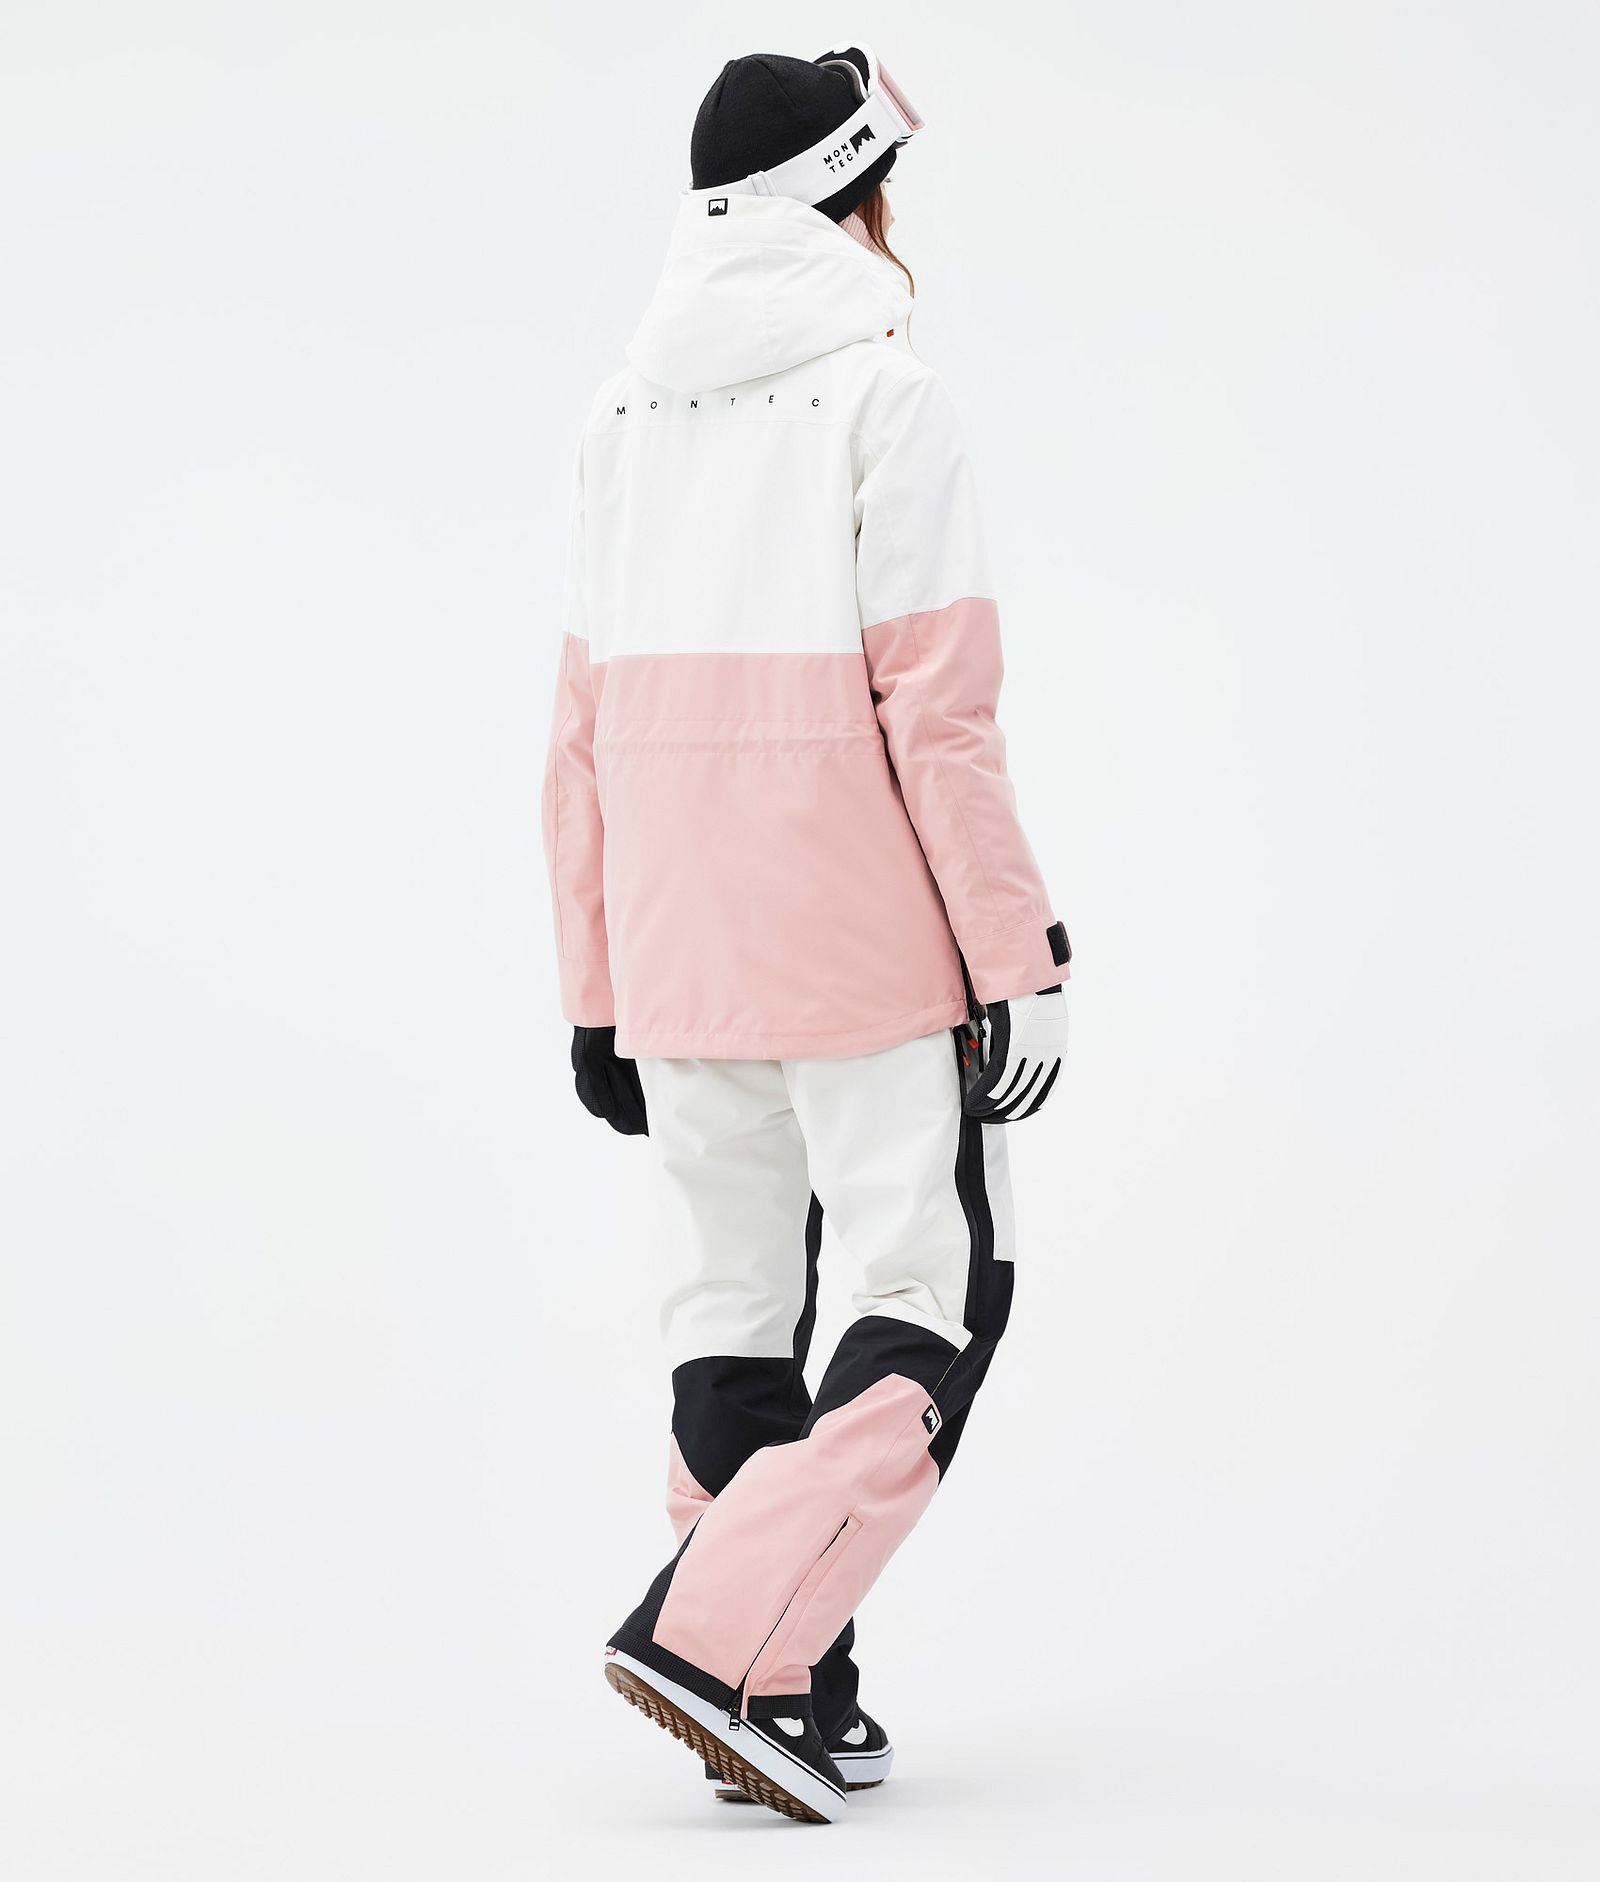 Montec Dune W Outfit Snowboard Donna Old White/Black/Soft Pink